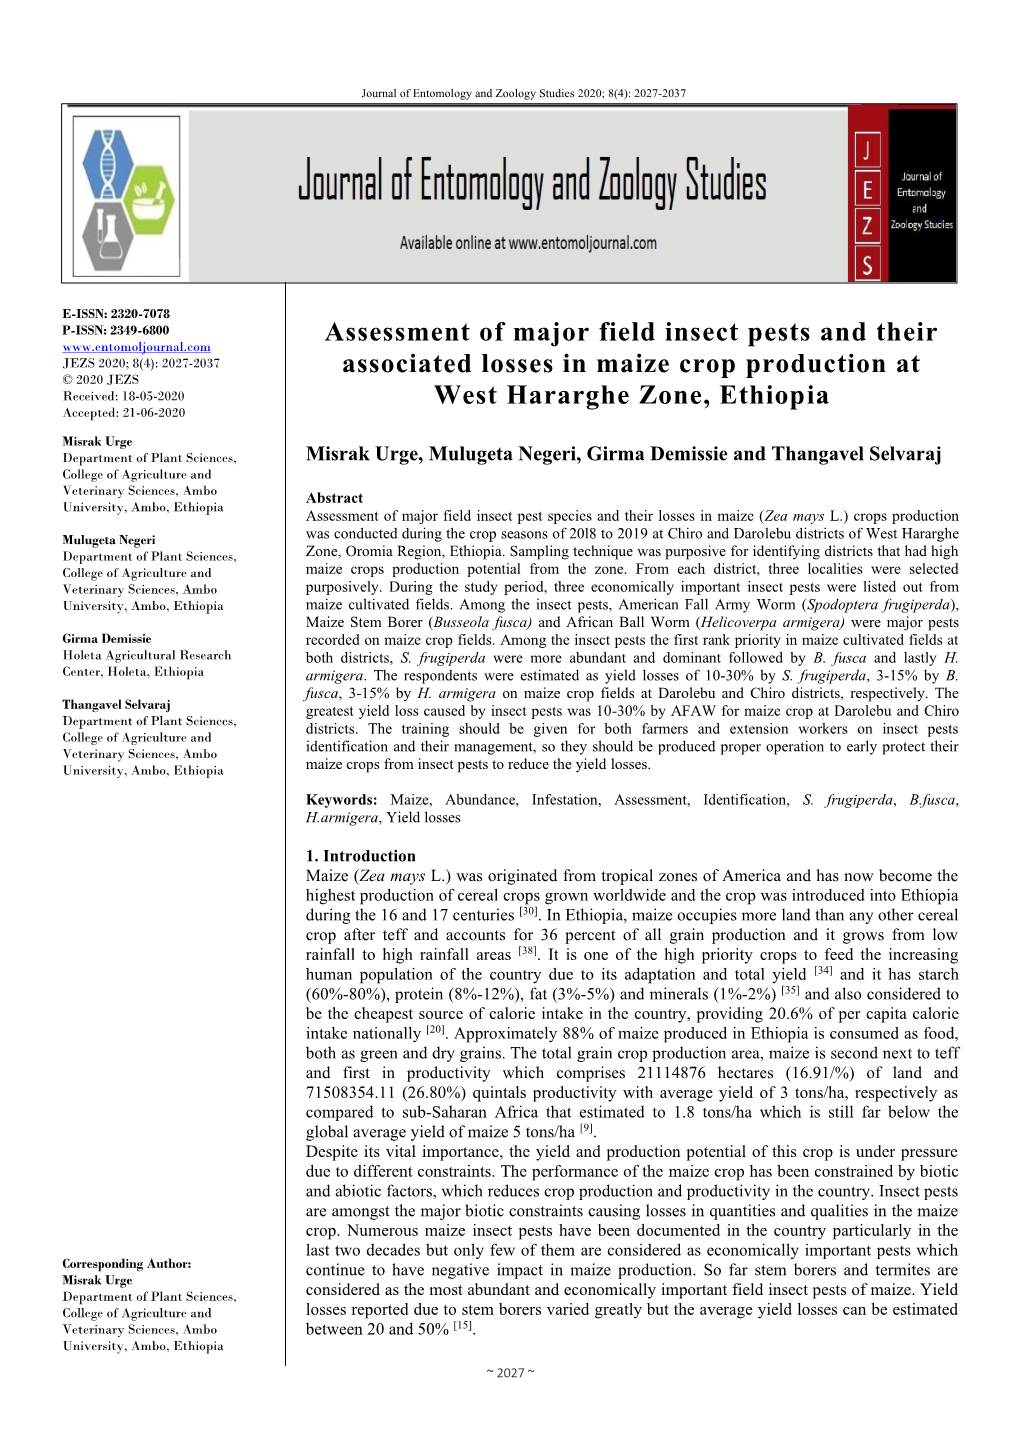 Assessment of Major Field Insect Pests and Their Associated Losses In